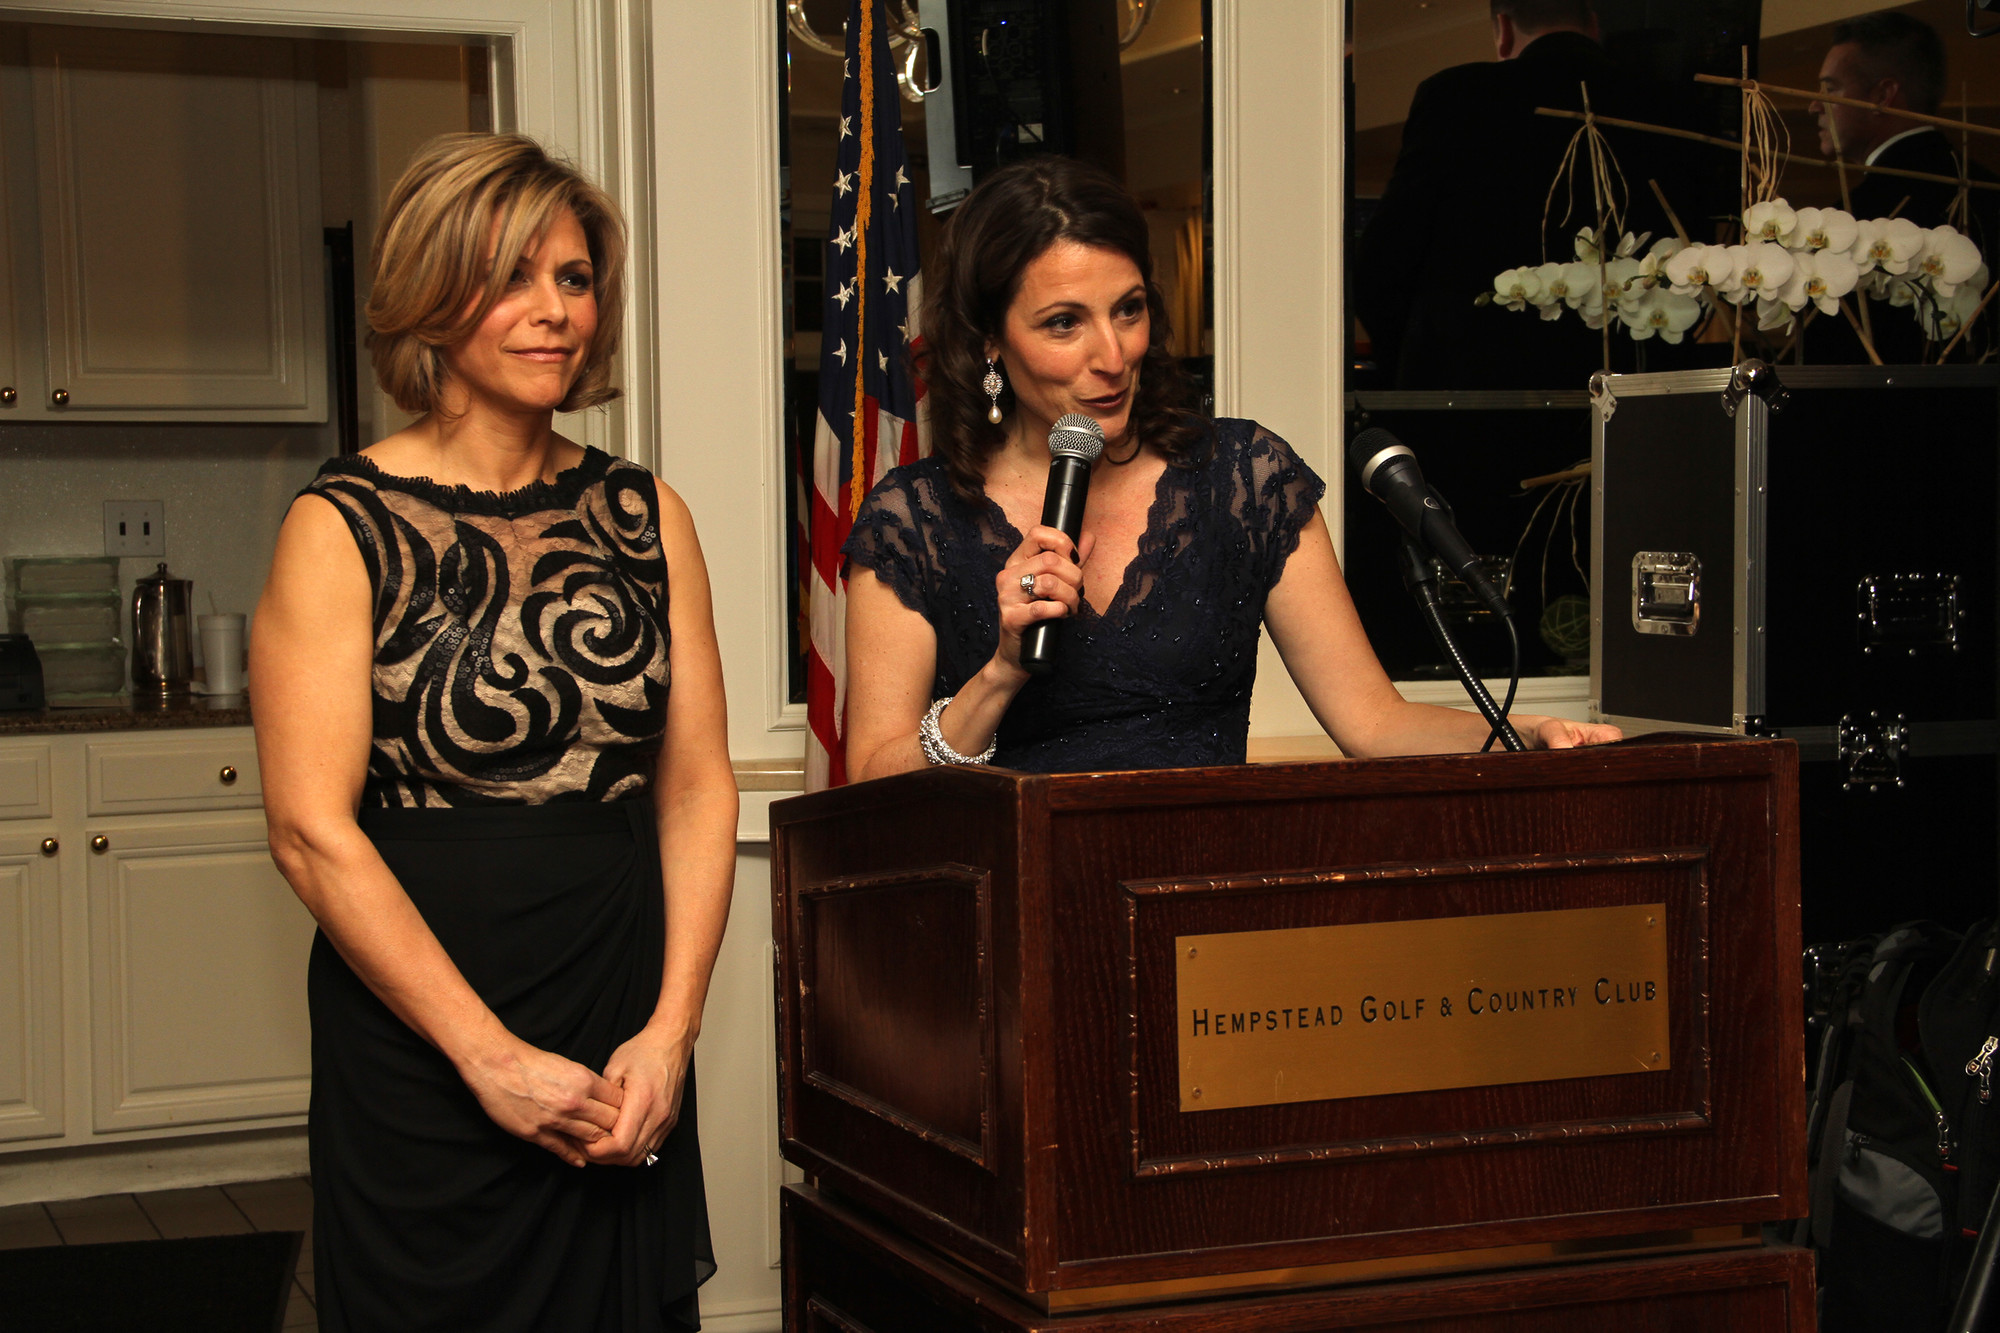 Dr. Audra Cerruto, left, and Tina Rekus, Education Foundation vice presidents and co-chairs of the gala, addressed the audience.